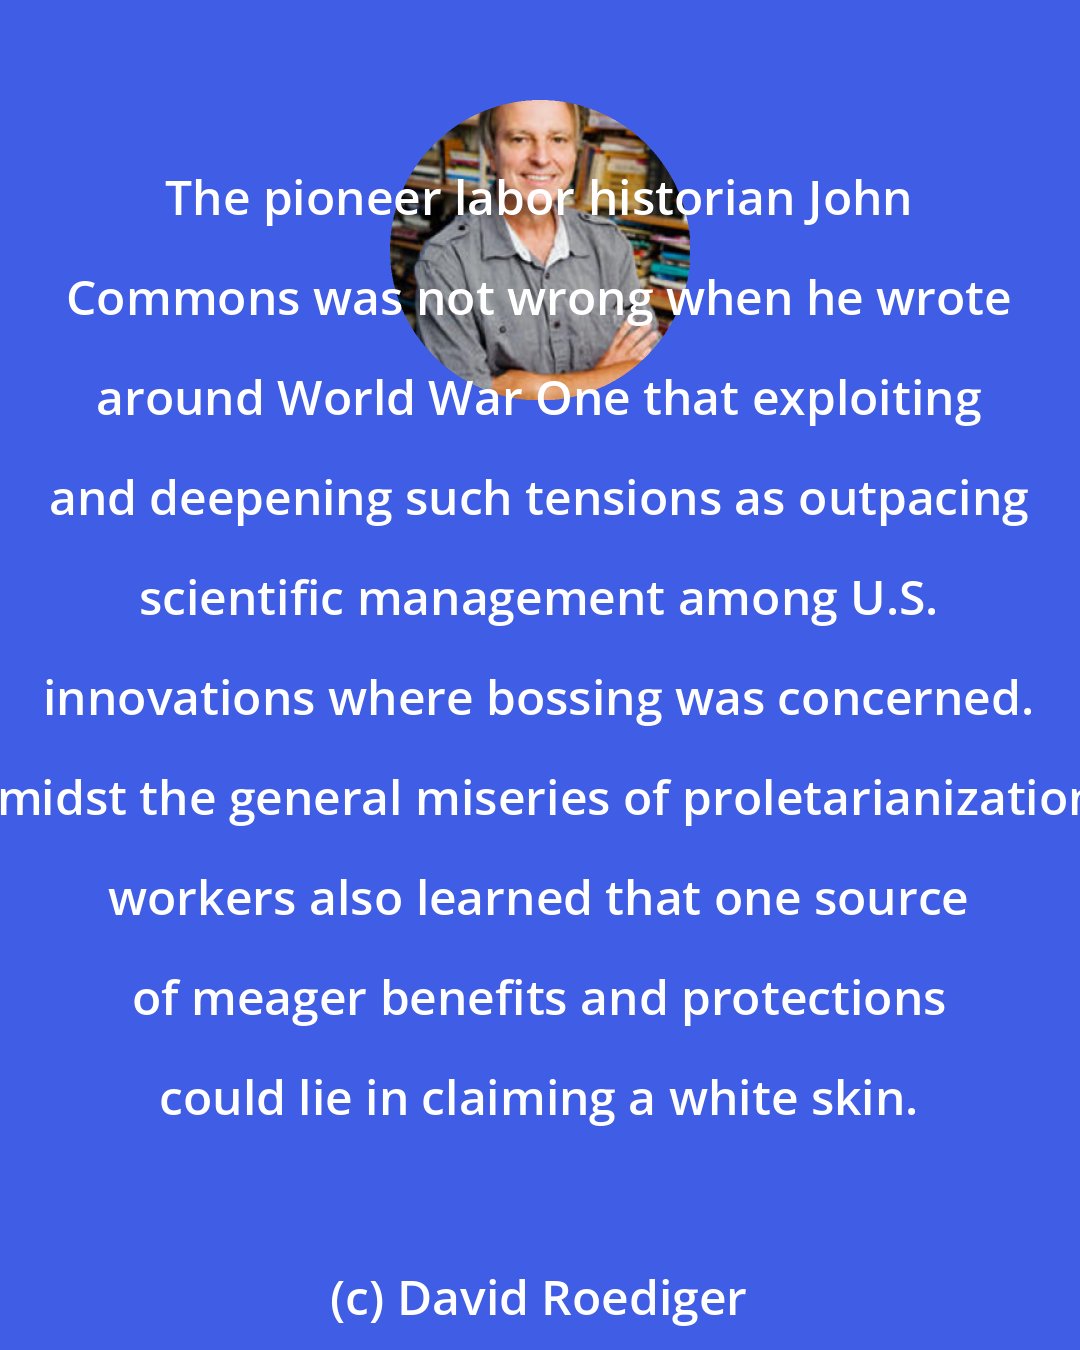 David Roediger: The pioneer labor historian John Commons was not wrong when he wrote around World War One that exploiting and deepening such tensions as outpacing scientific management among U.S. innovations where bossing was concerned. Amidst the general miseries of proletarianization, workers also learned that one source of meager benefits and protections could lie in claiming a white skin.